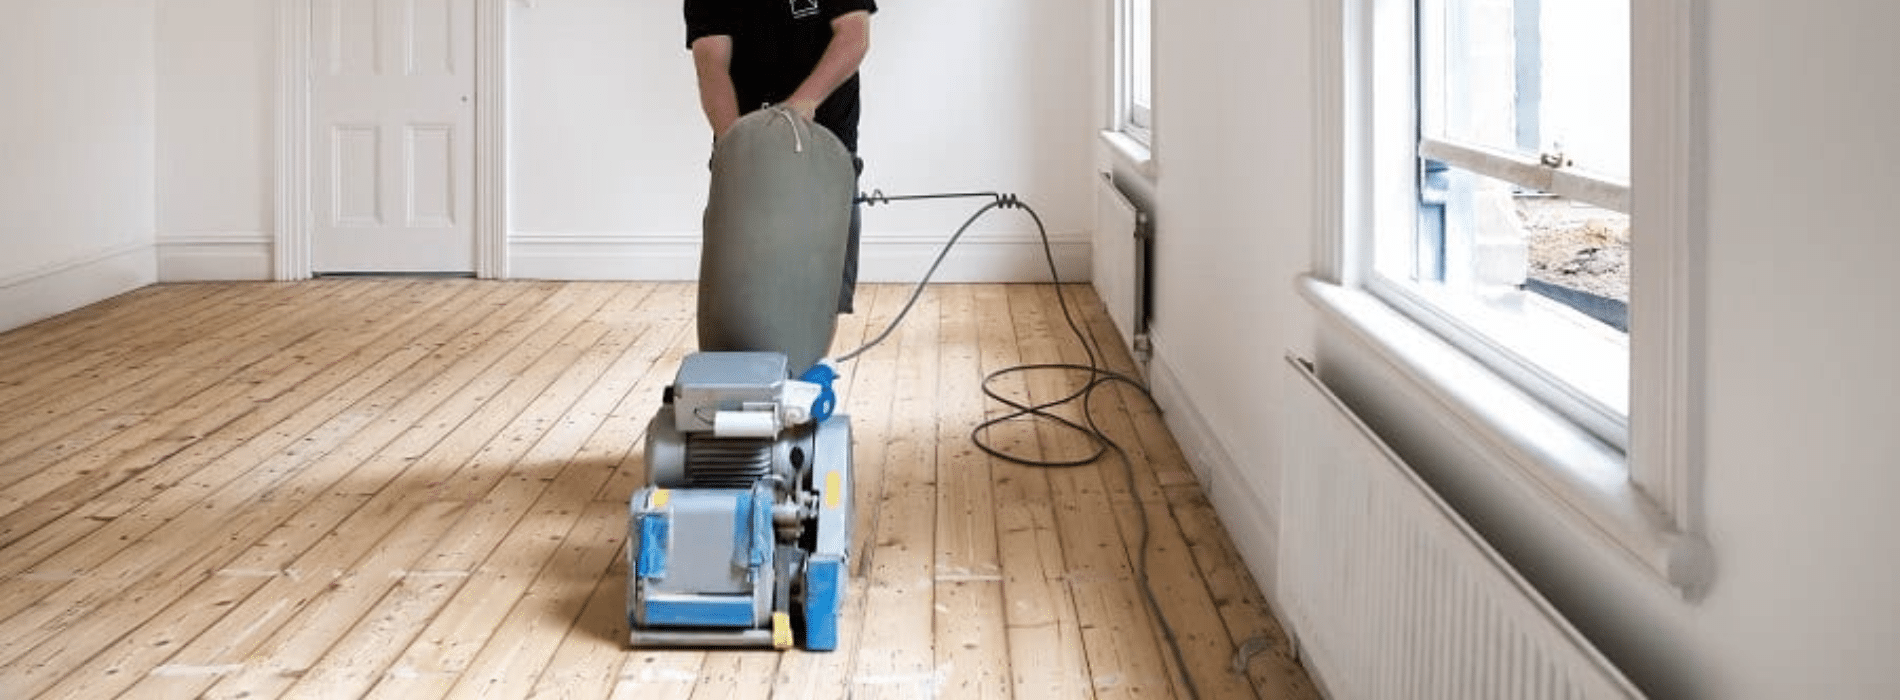 In Mitcham, CR4 Mr Sander® using Bona Scorpion sander: a powerful 1.5kW, 200mm sander with distressing drums. Connected to a dust extraction system with a HEPA filter for cleanliness and efficiency. 